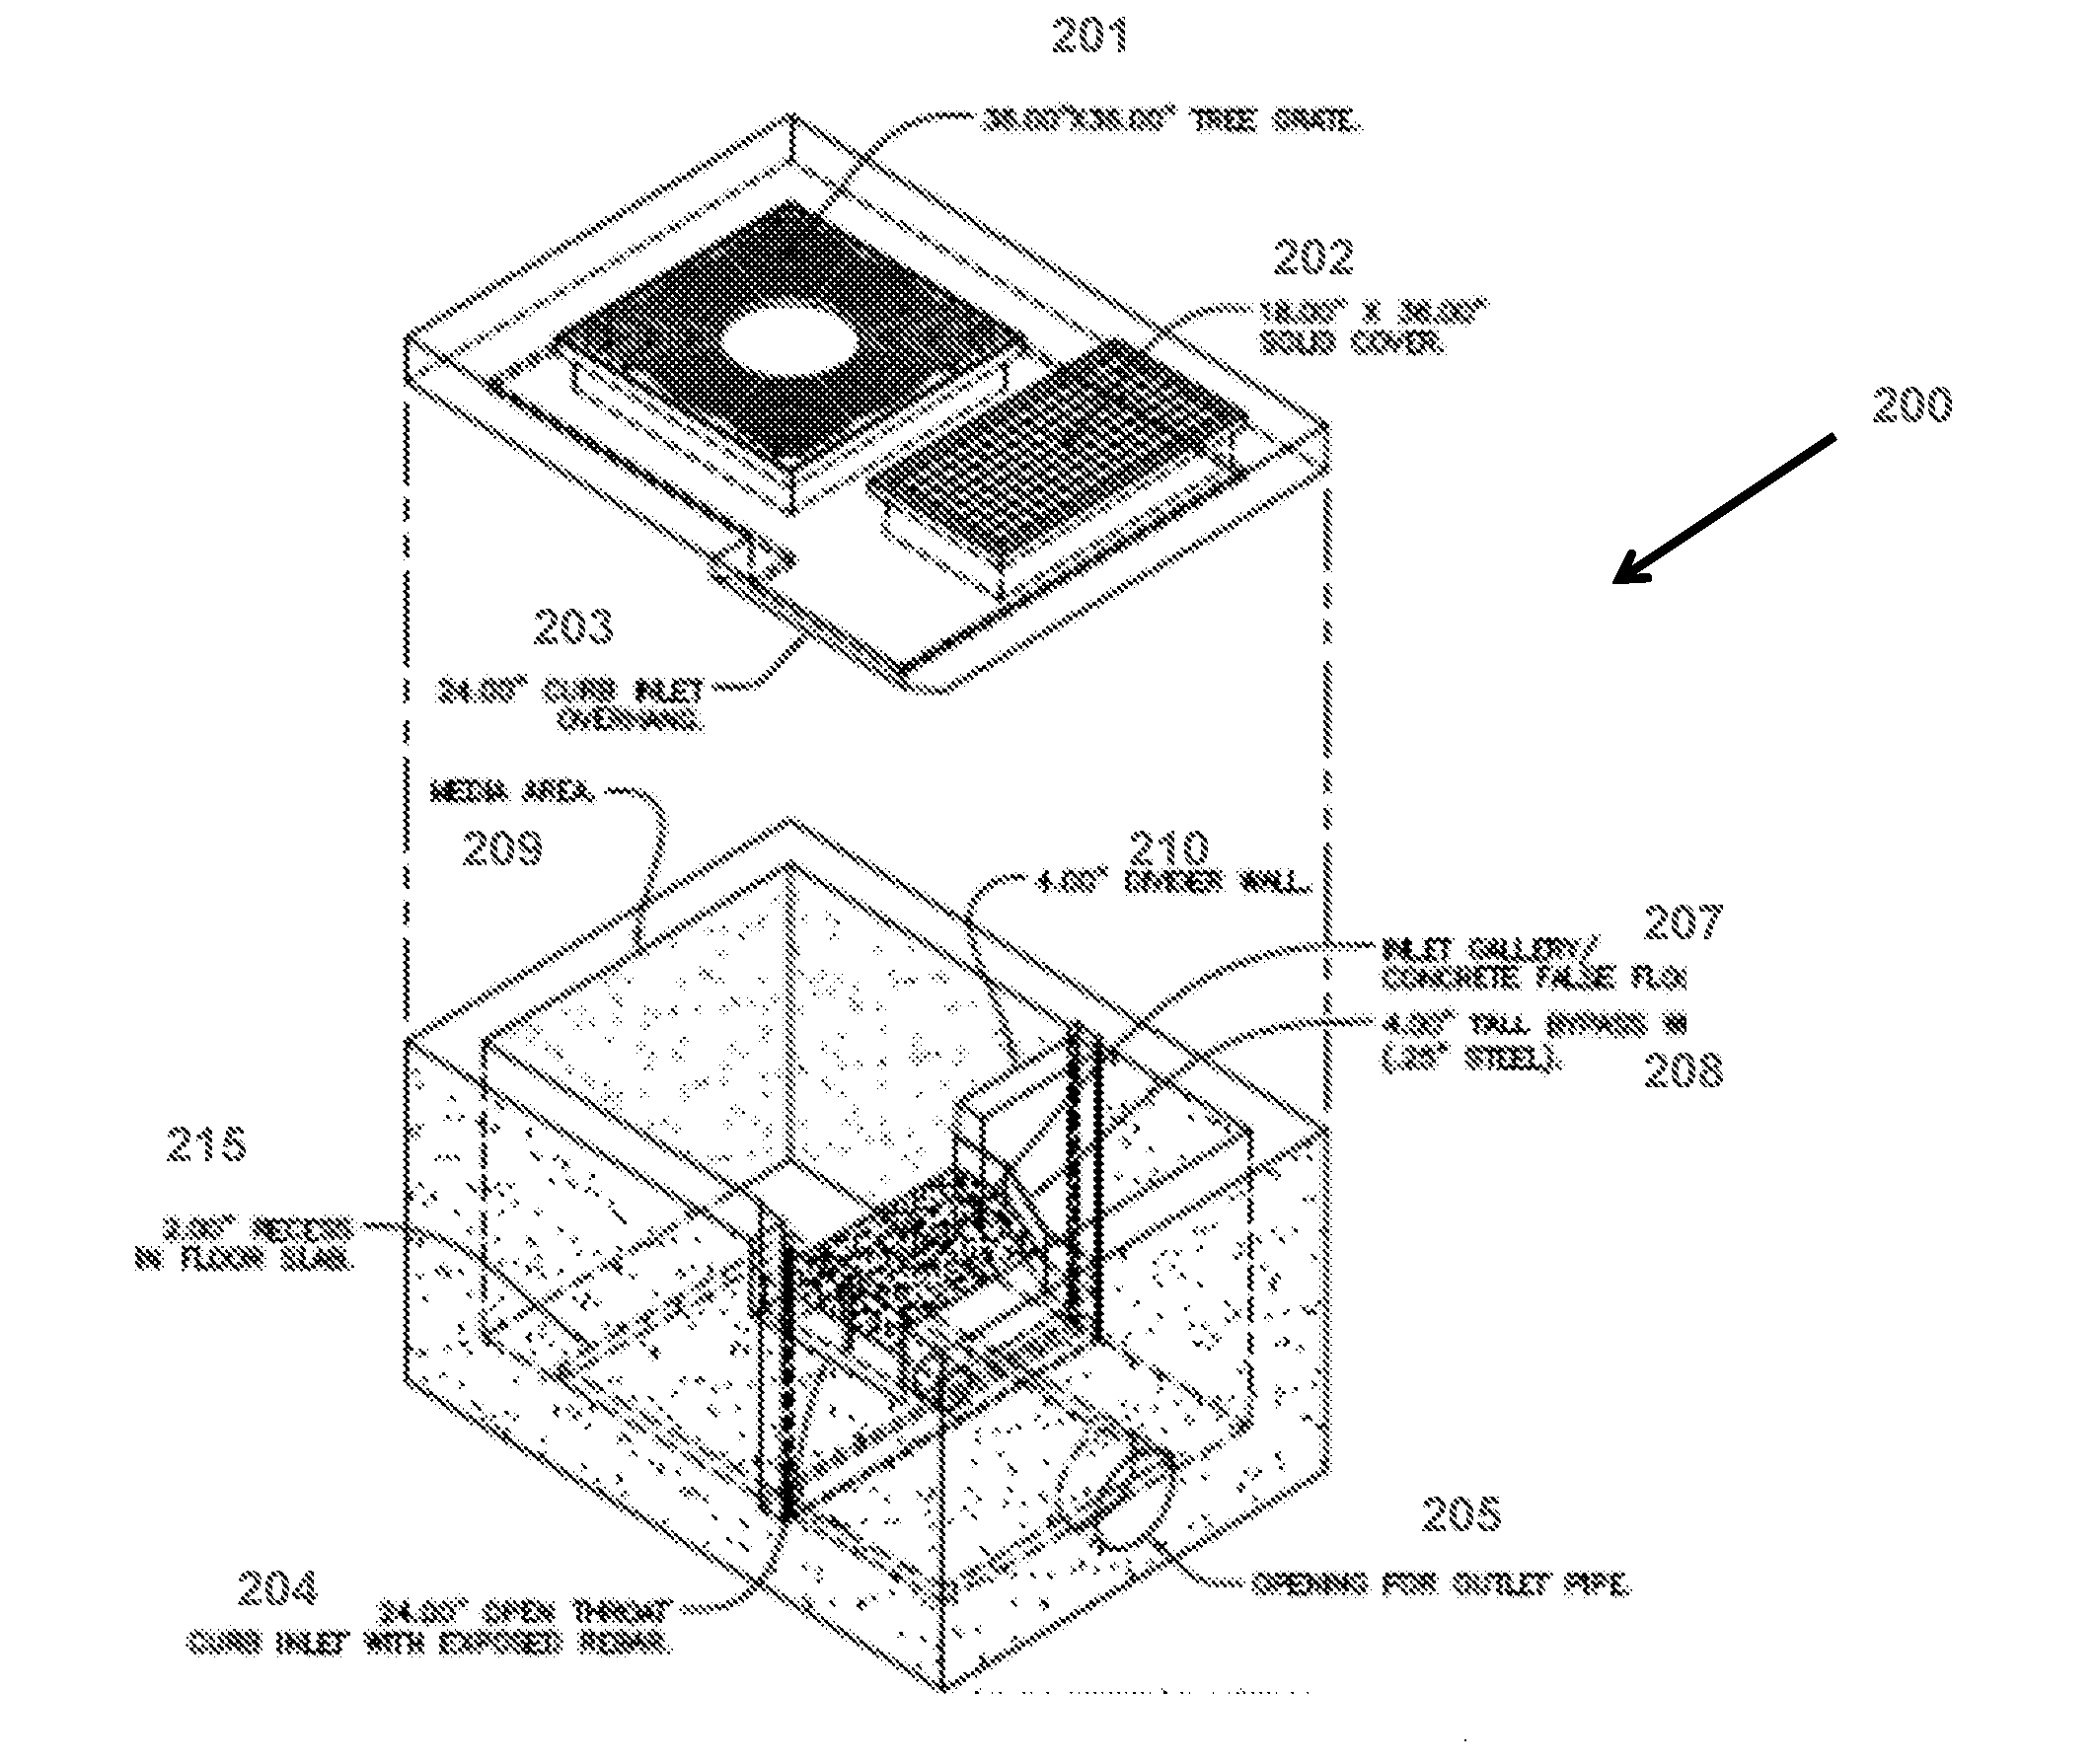 Tree Box Filter with Hydromodification Panels